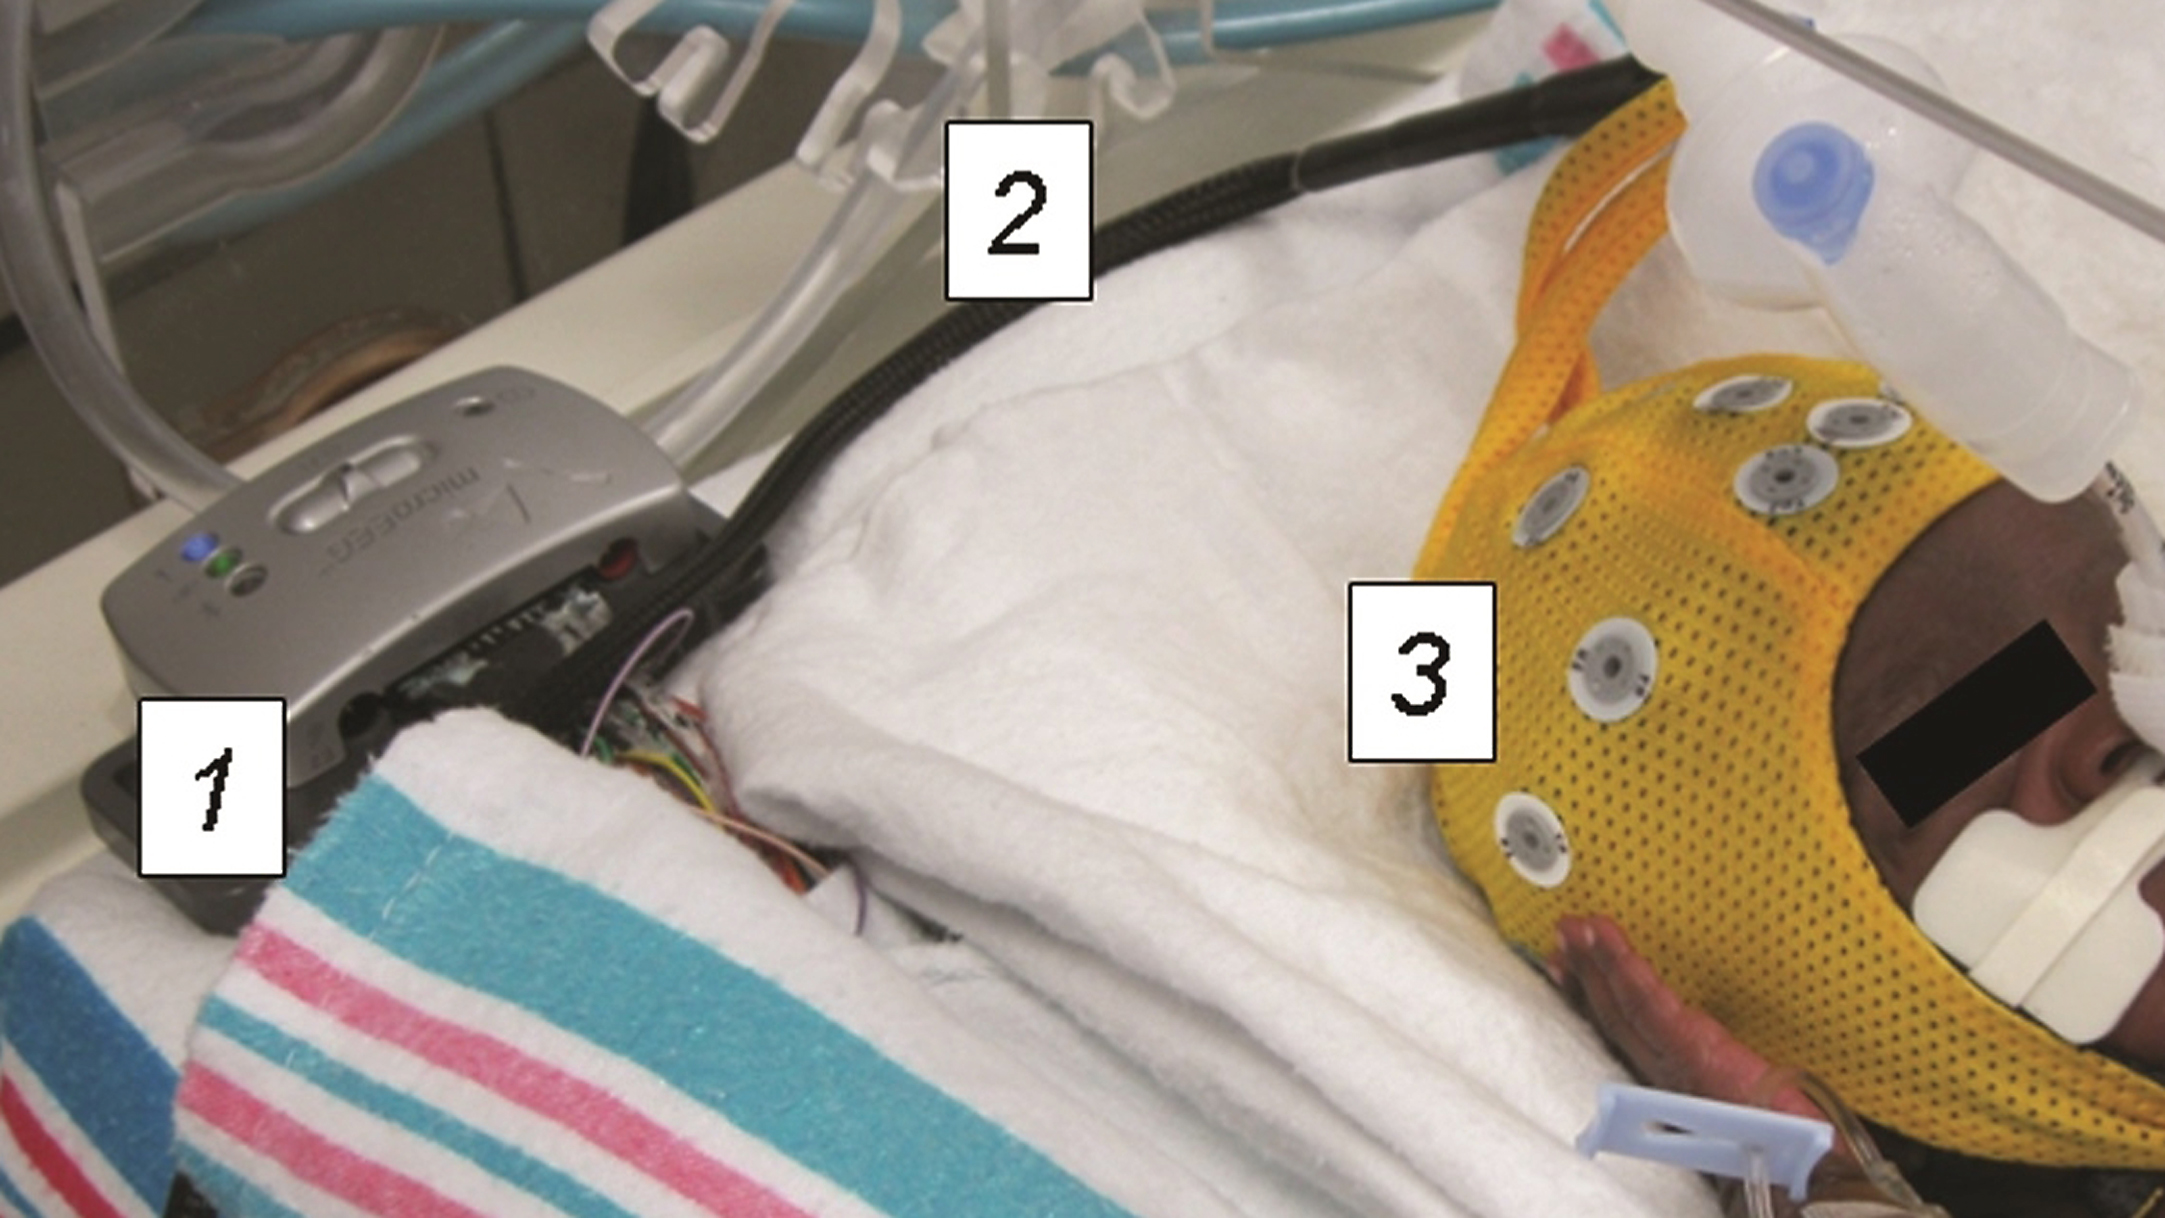 Preterm infant undergoing wireless EEG recording. The recording equipment is contained entirely within the isolette. The device transmits EEG recordings wirelessly to a bedside computer in real time. 1) Wireless EEG recording device 2) Connector cable 3) Electrode cap.